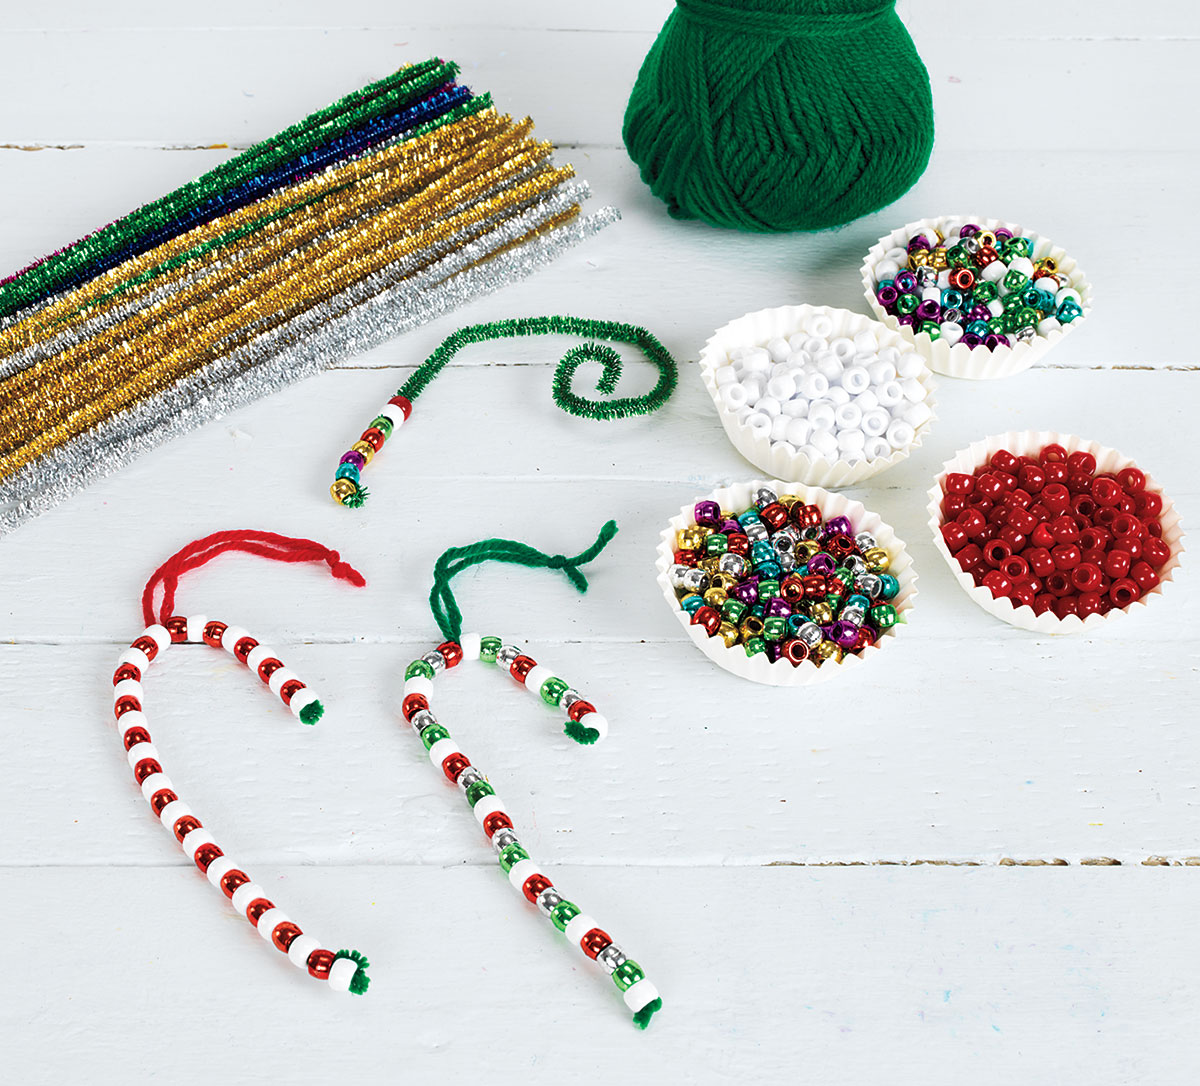 Beading Candy Canes Creative Craft Activity for Christmas or Holidays